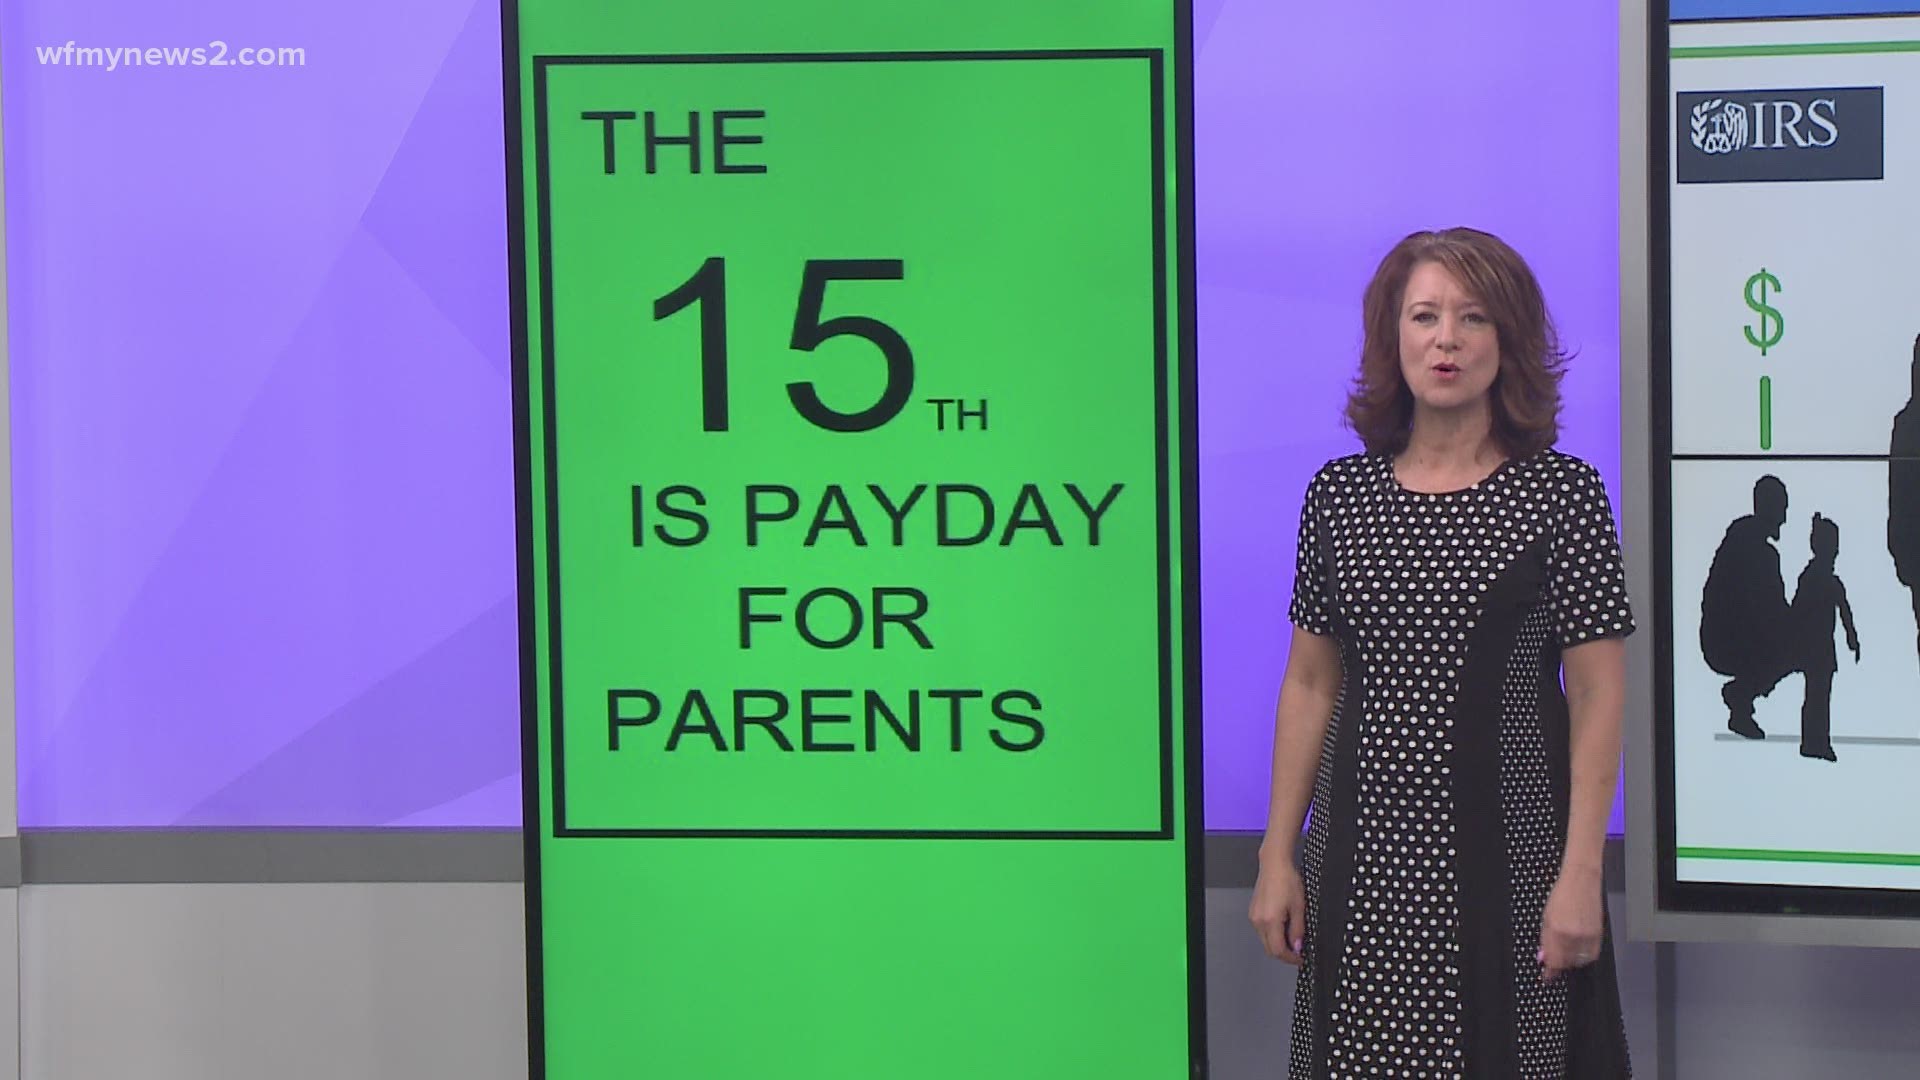 With the child tax credit, the IRS will be sending parents of kids less than 17 years old a payment.